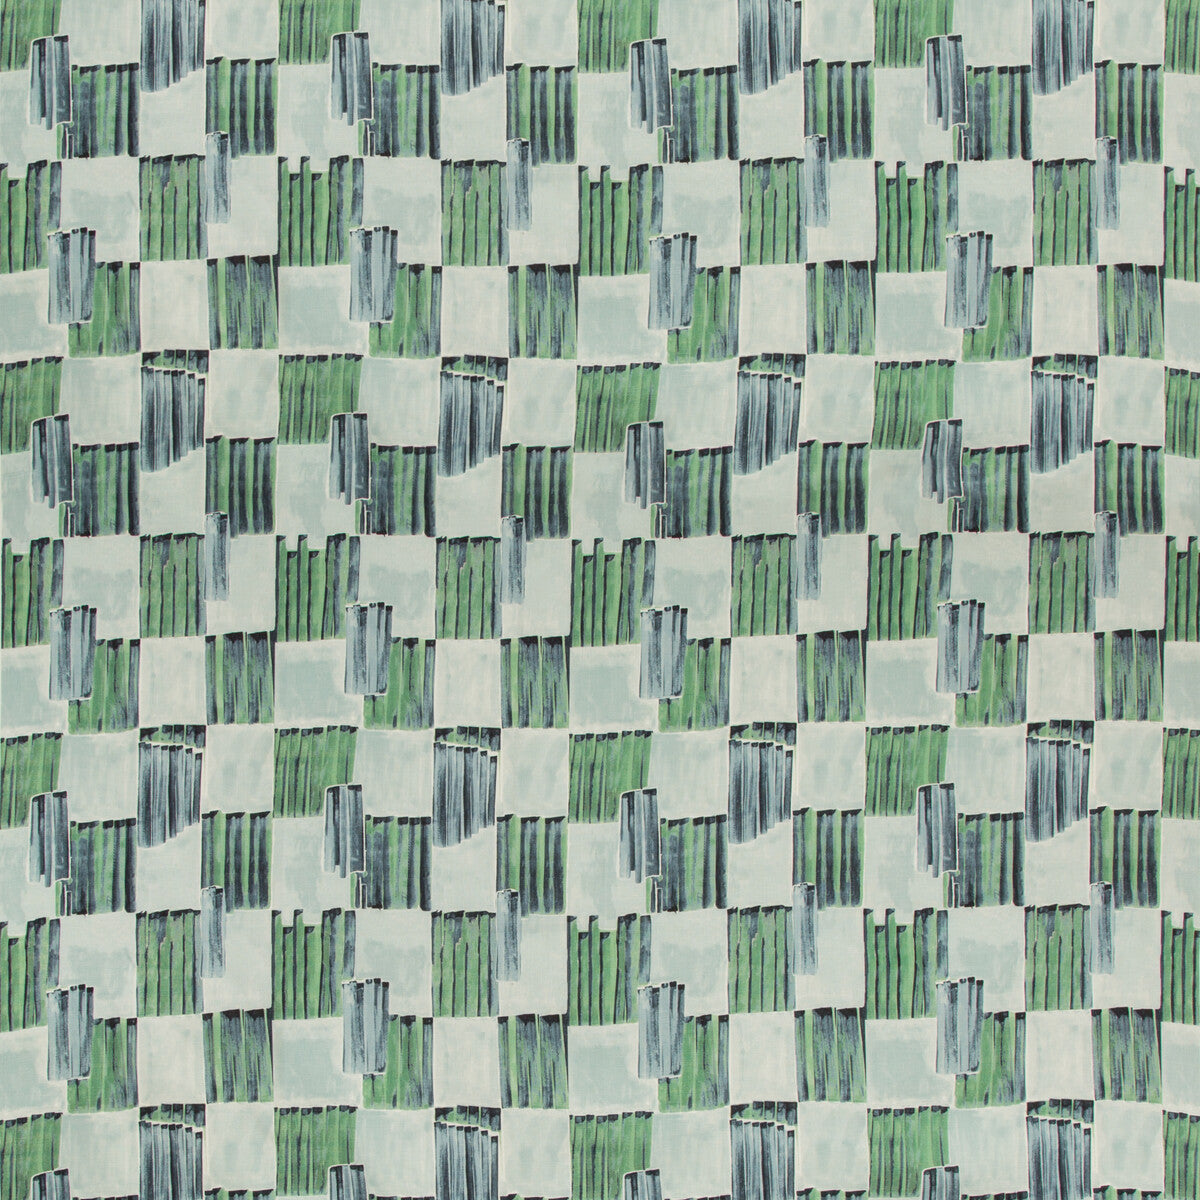 Lyre fabric in pool color - pattern GWF-3753.153.0 - by Lee Jofa Modern in the Kelly Wearstler V collection